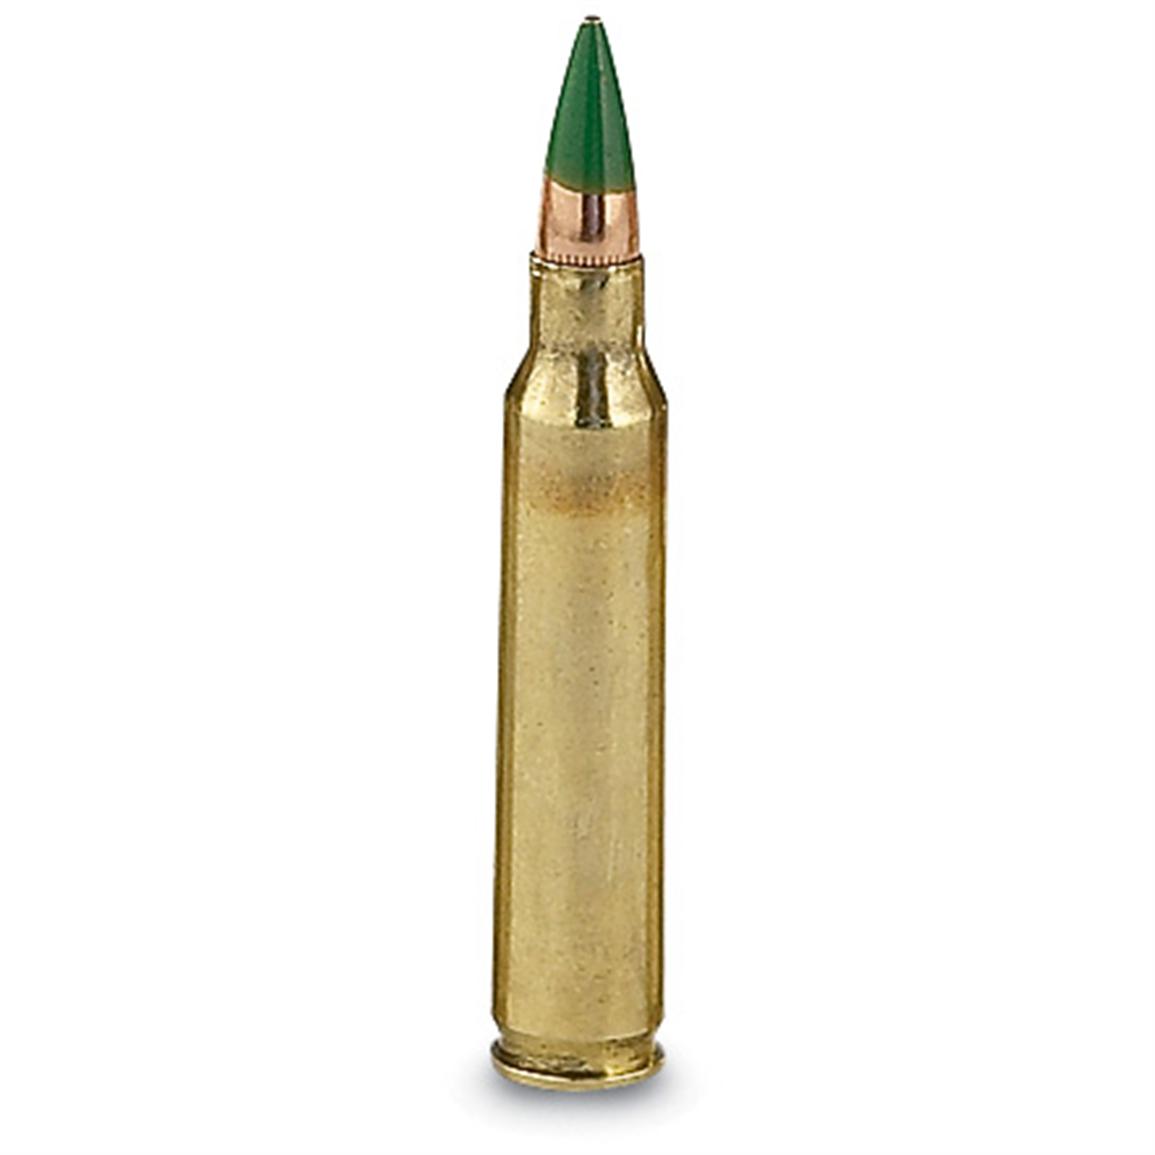 Winchester M193 Ammo Review